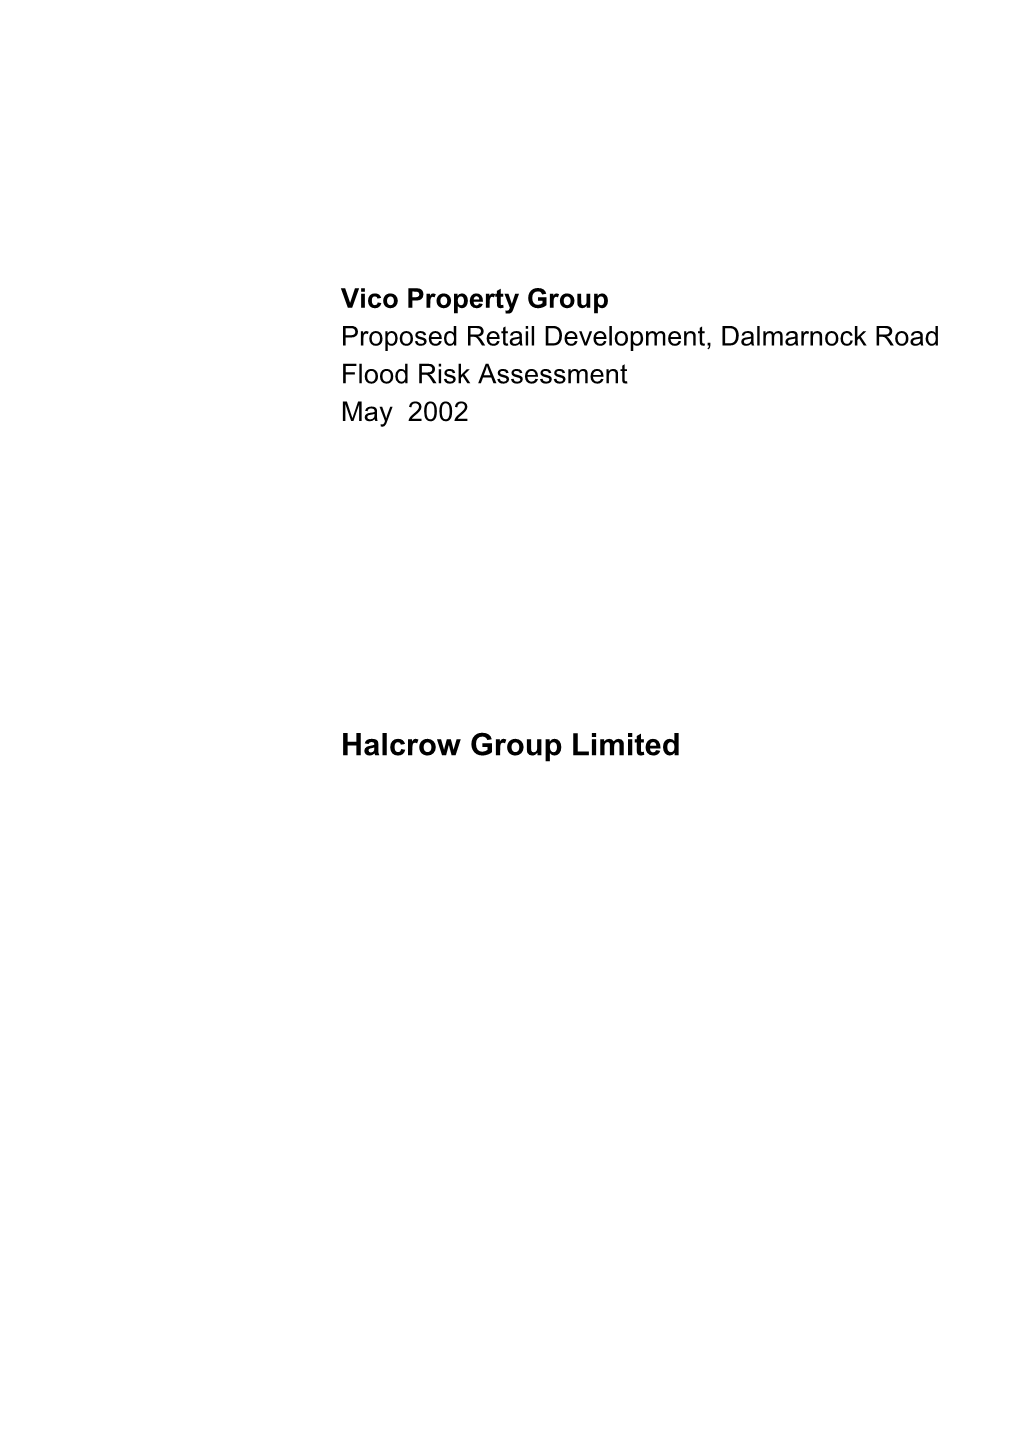 Halcrow Group Limited Vico Property Group Proposed Retail Development, Dalmarnock Road Flood Risk Assessment May 2002